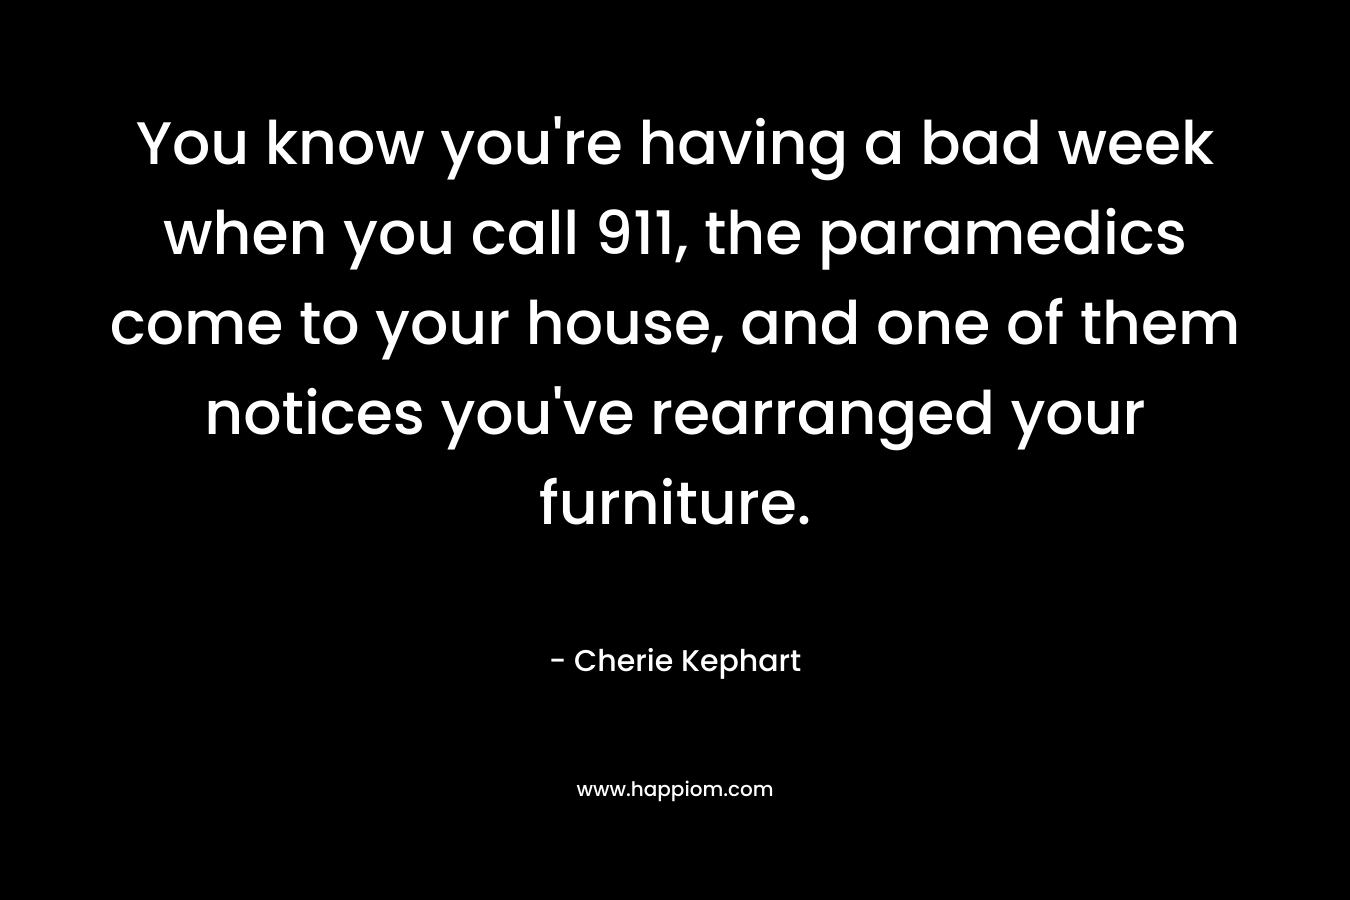 You know you’re having a bad week when you call 911, the paramedics come to your house, and one of them notices you’ve rearranged your furniture. – Cherie Kephart